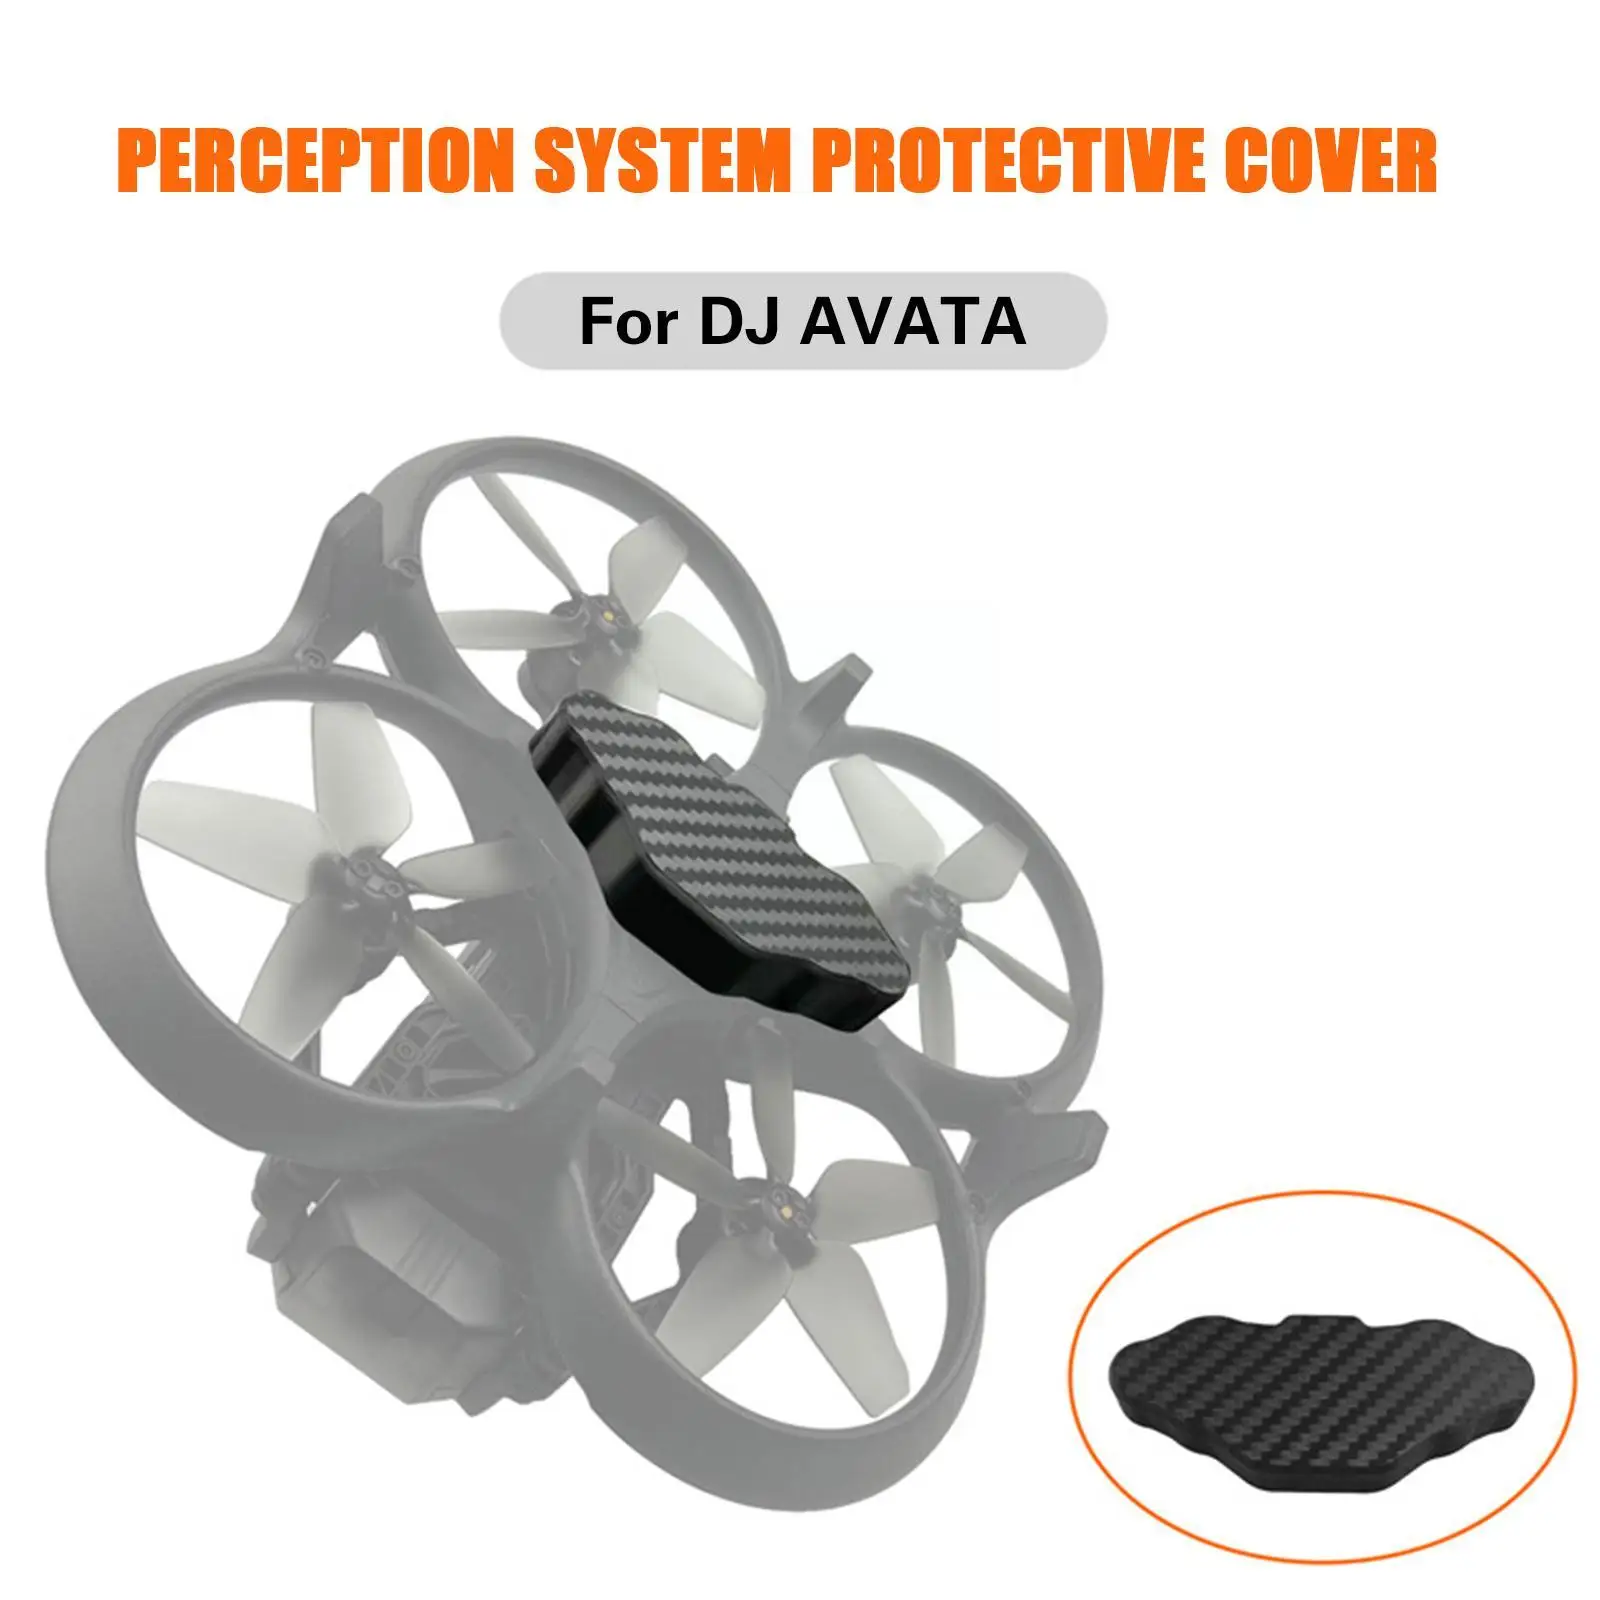 

Protective Cover For Avata Sensor Camera Lens Guard Body Bottom Perception System Dustproof Drone Accessories H4n0